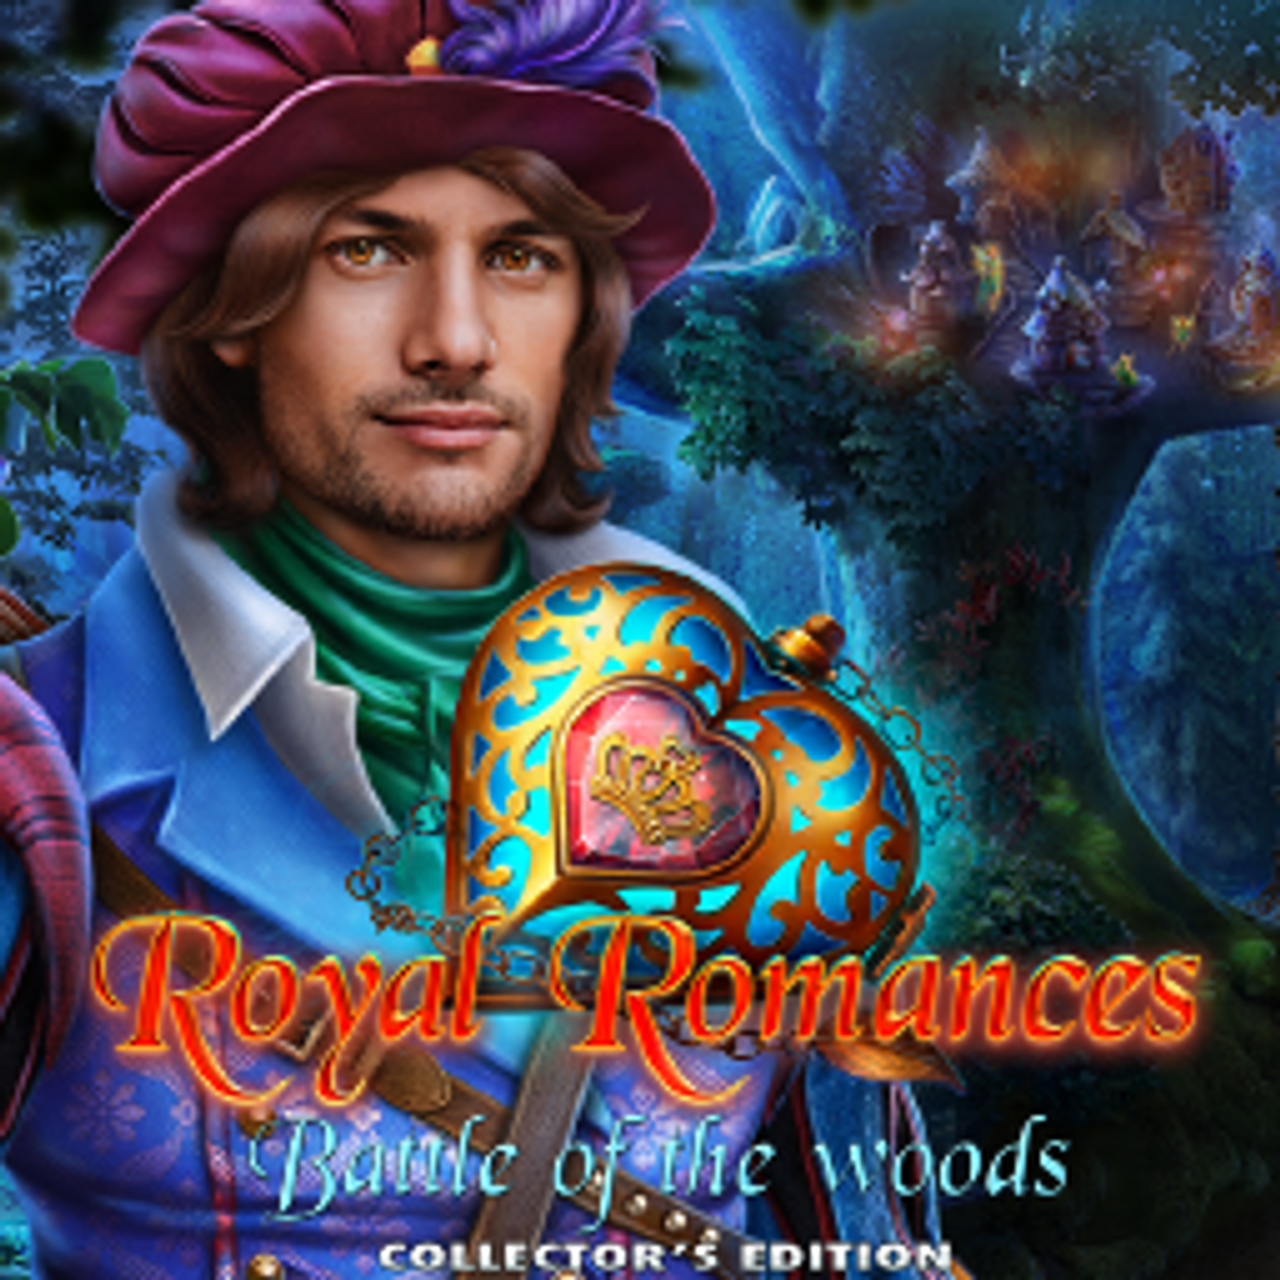 Royal Romances: Battle of the Woods Collector's Edition